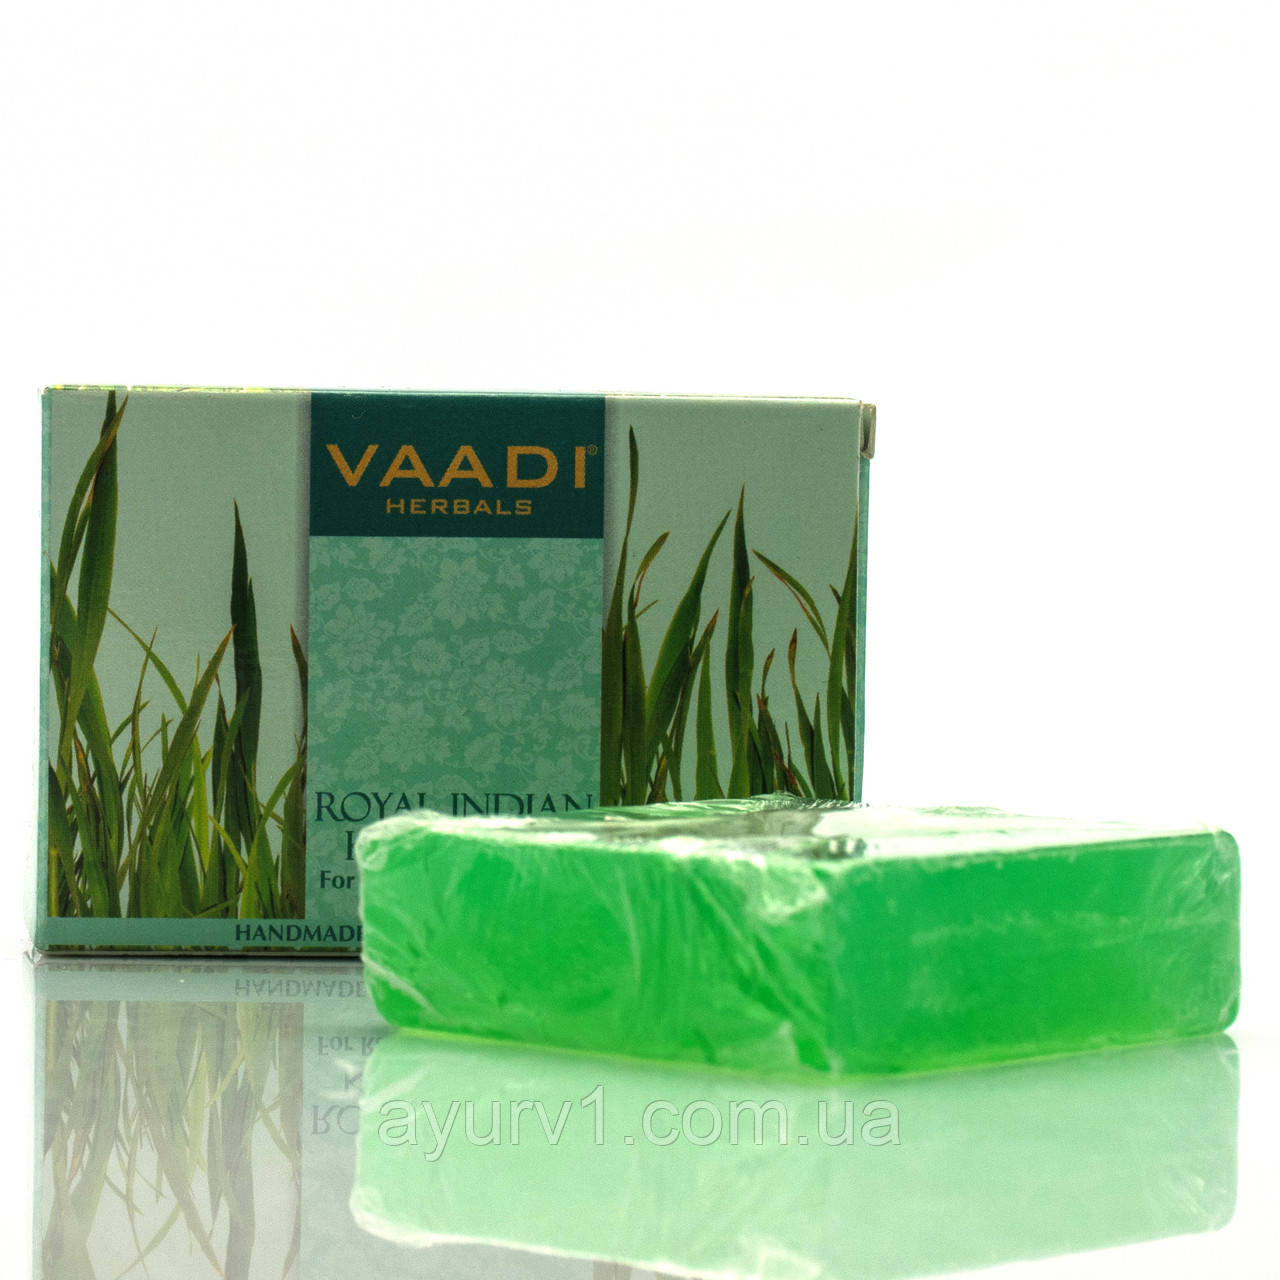 Мыло Хус Royal Indian Khus Soap For Radiant Complexion, Vaadi Herbals, Индия 75 г - фото 1 - id-p1608399760